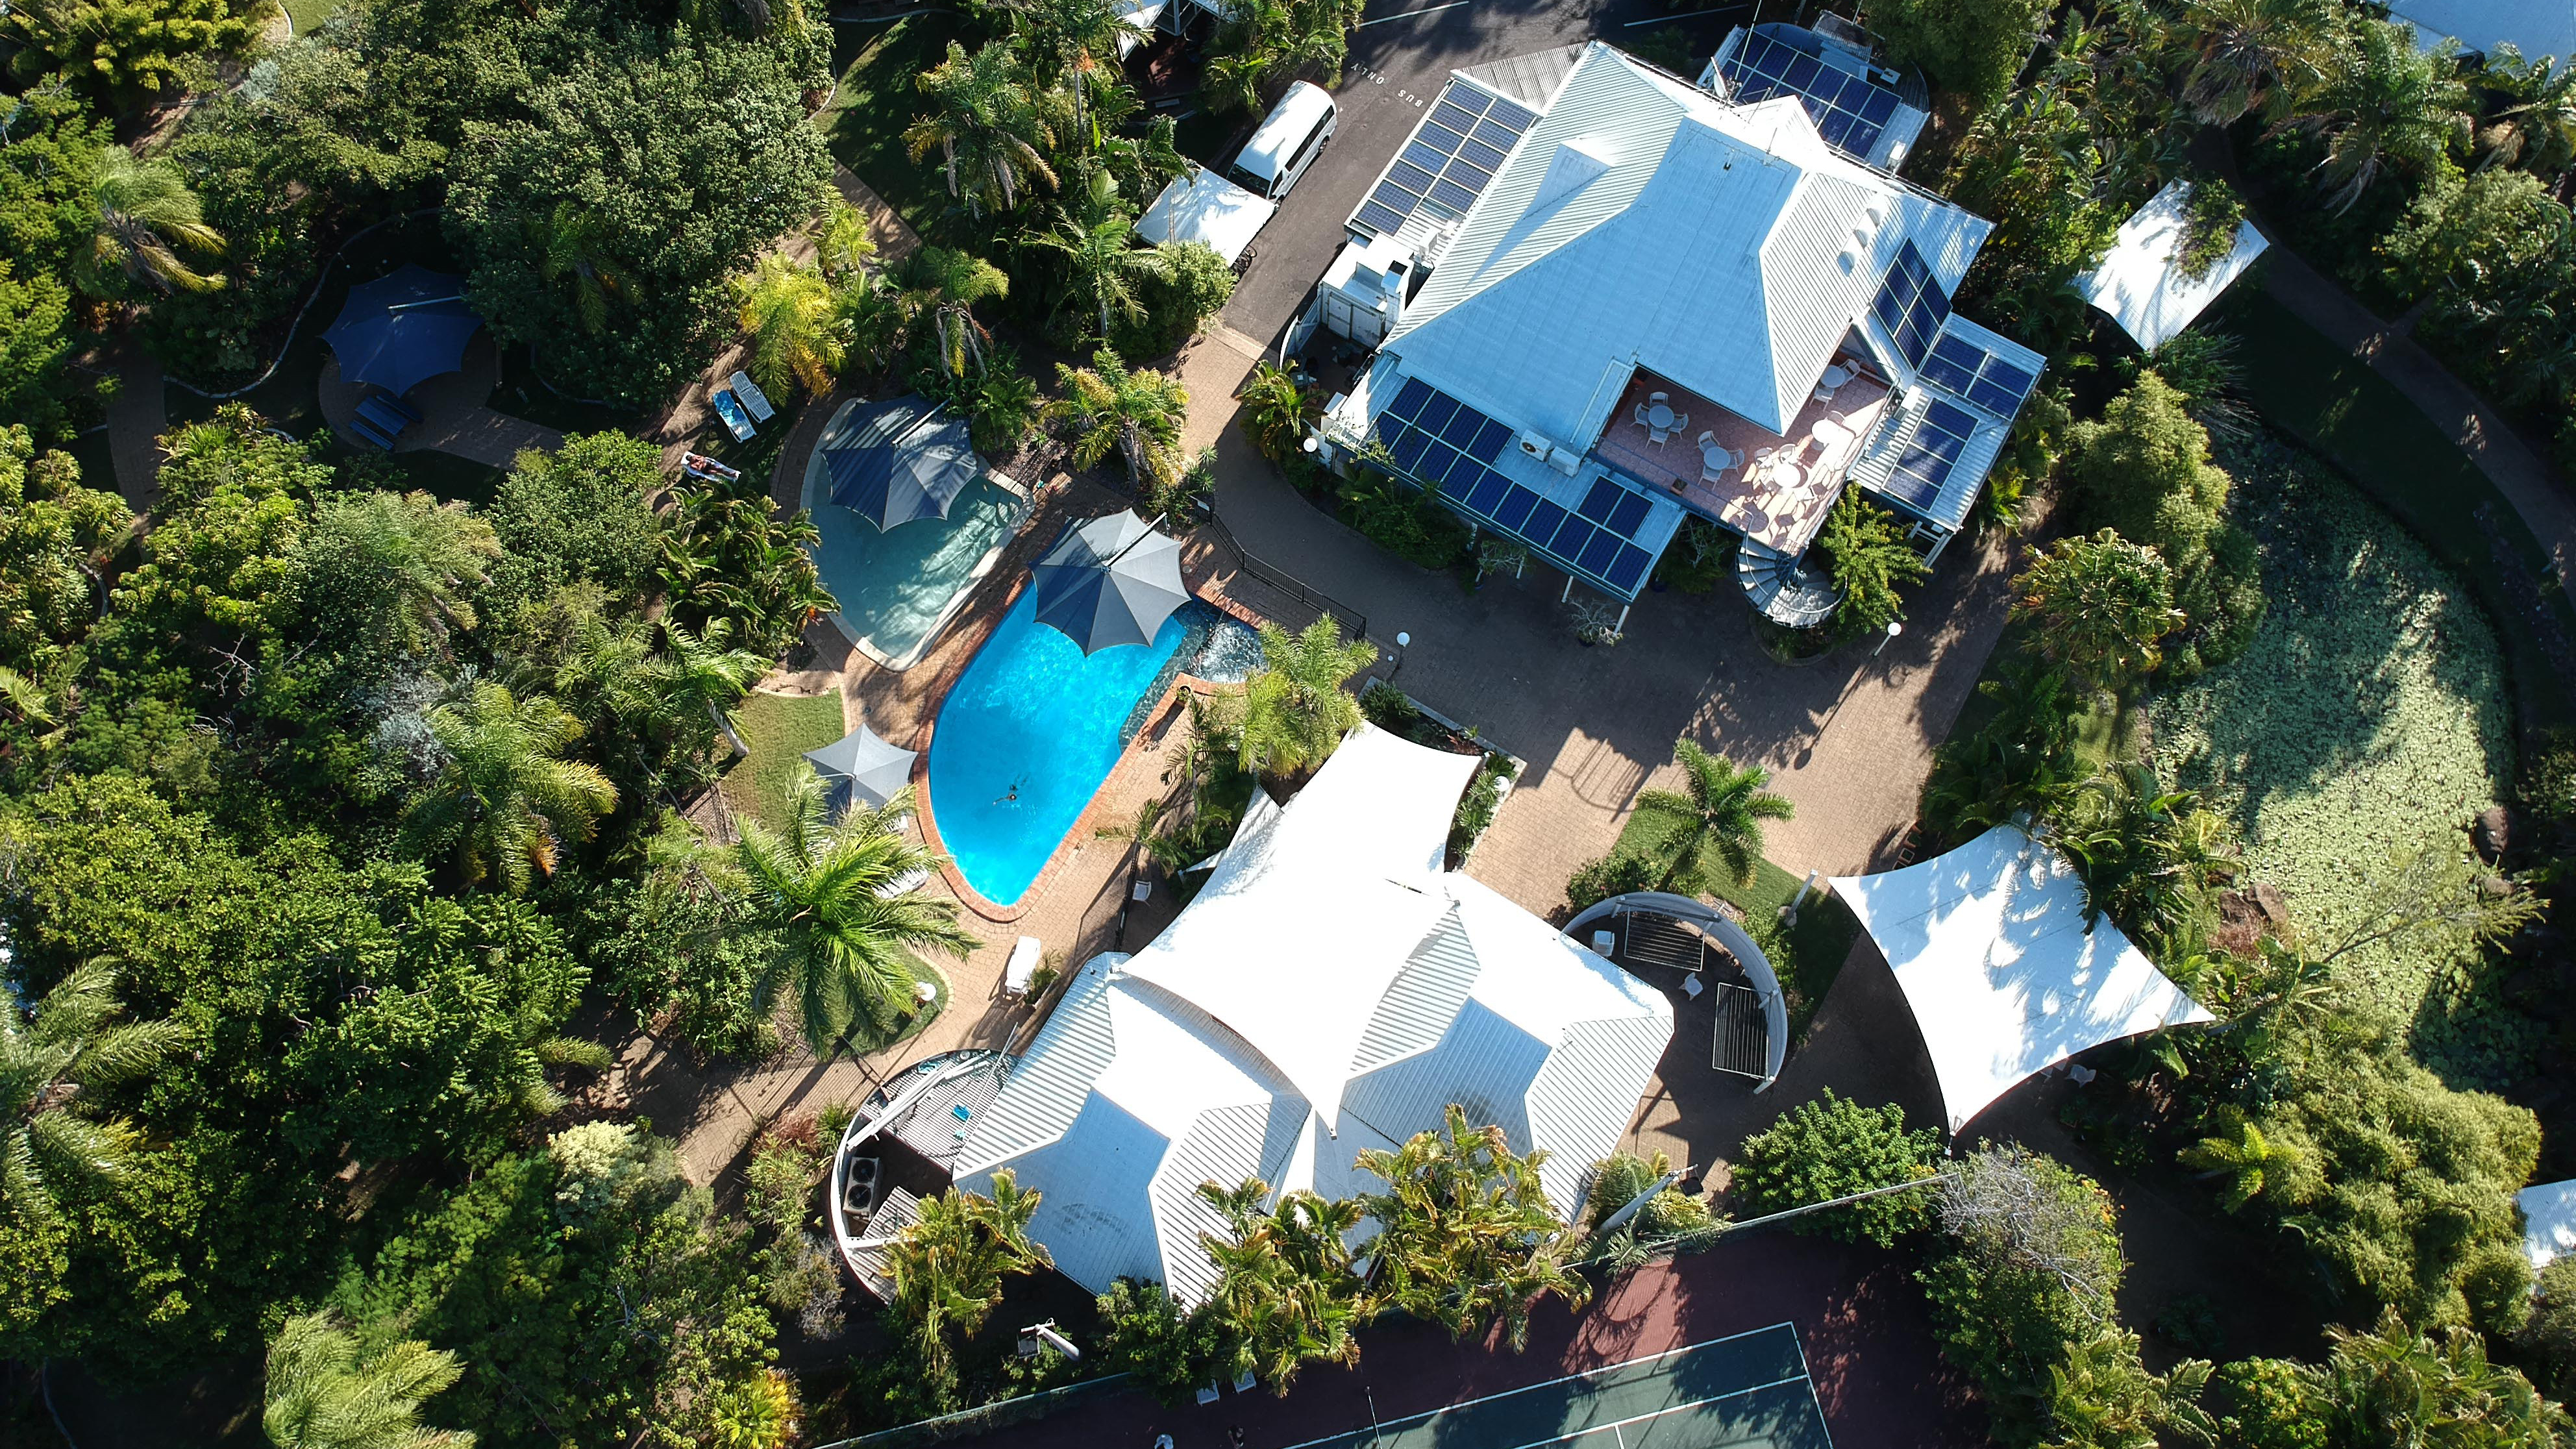 Treat the Family to An Exciting Escape at Kellys Beach Resort